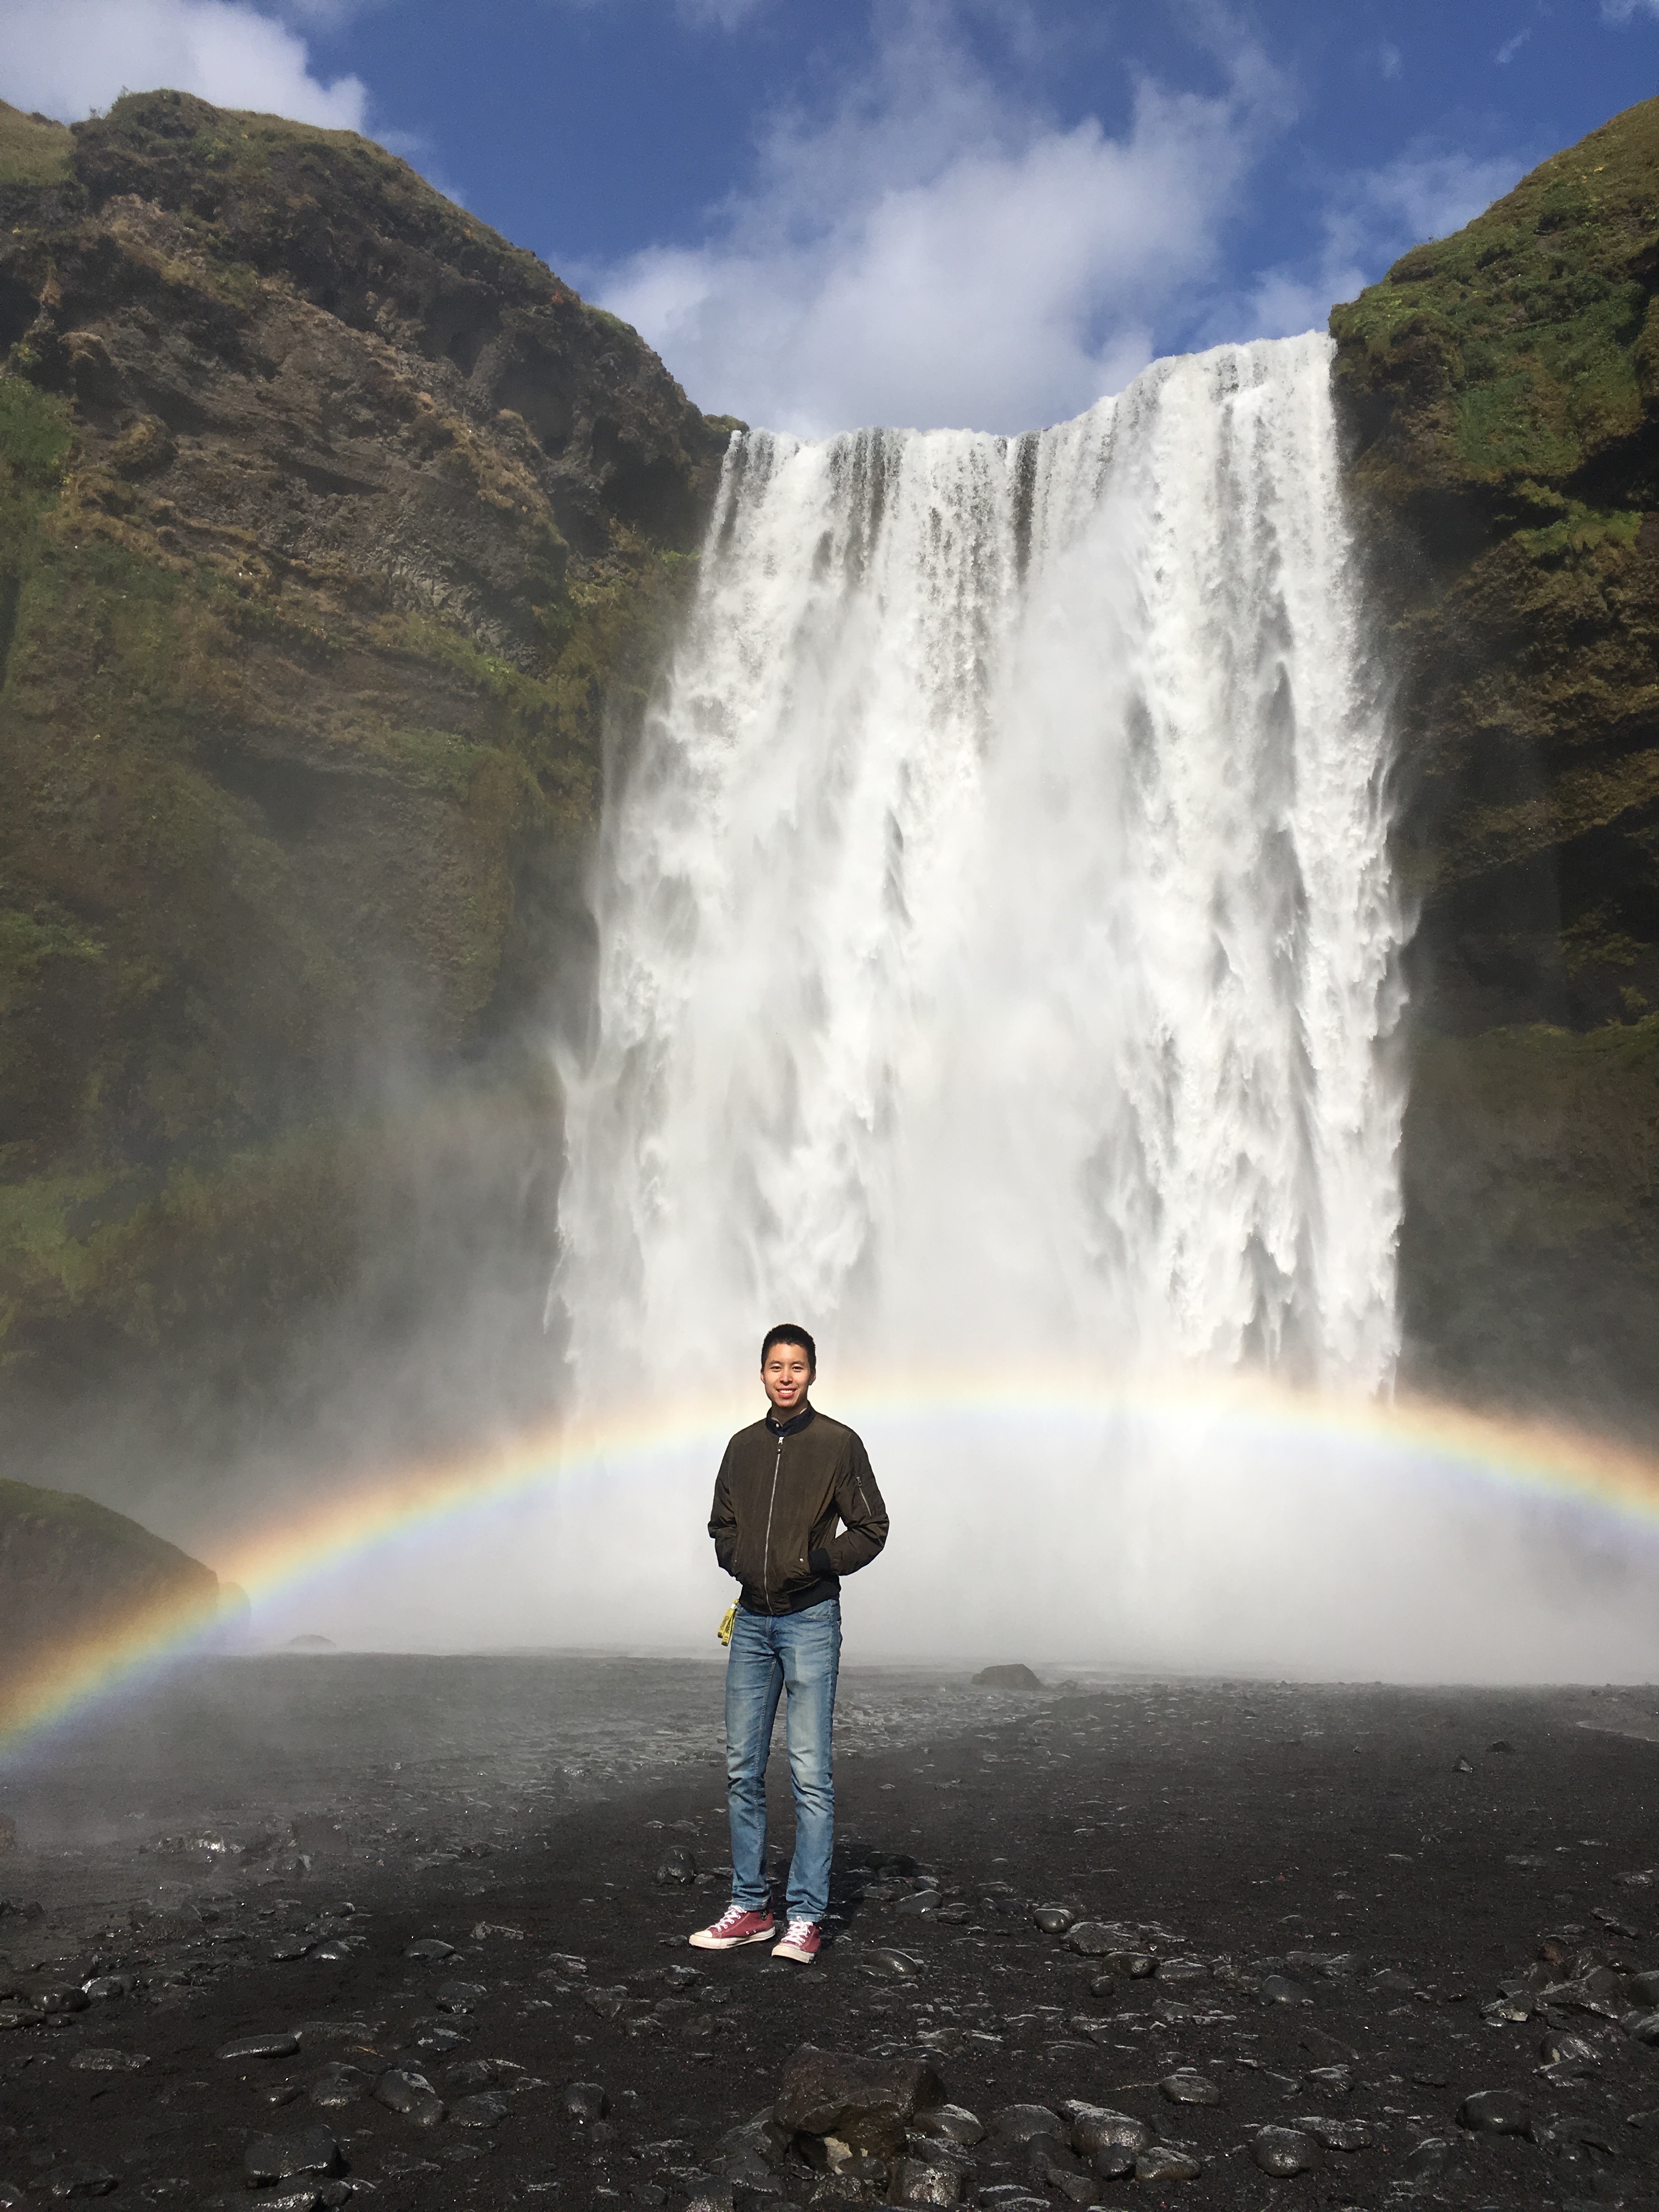 Photo of me in Iceland, August 2019